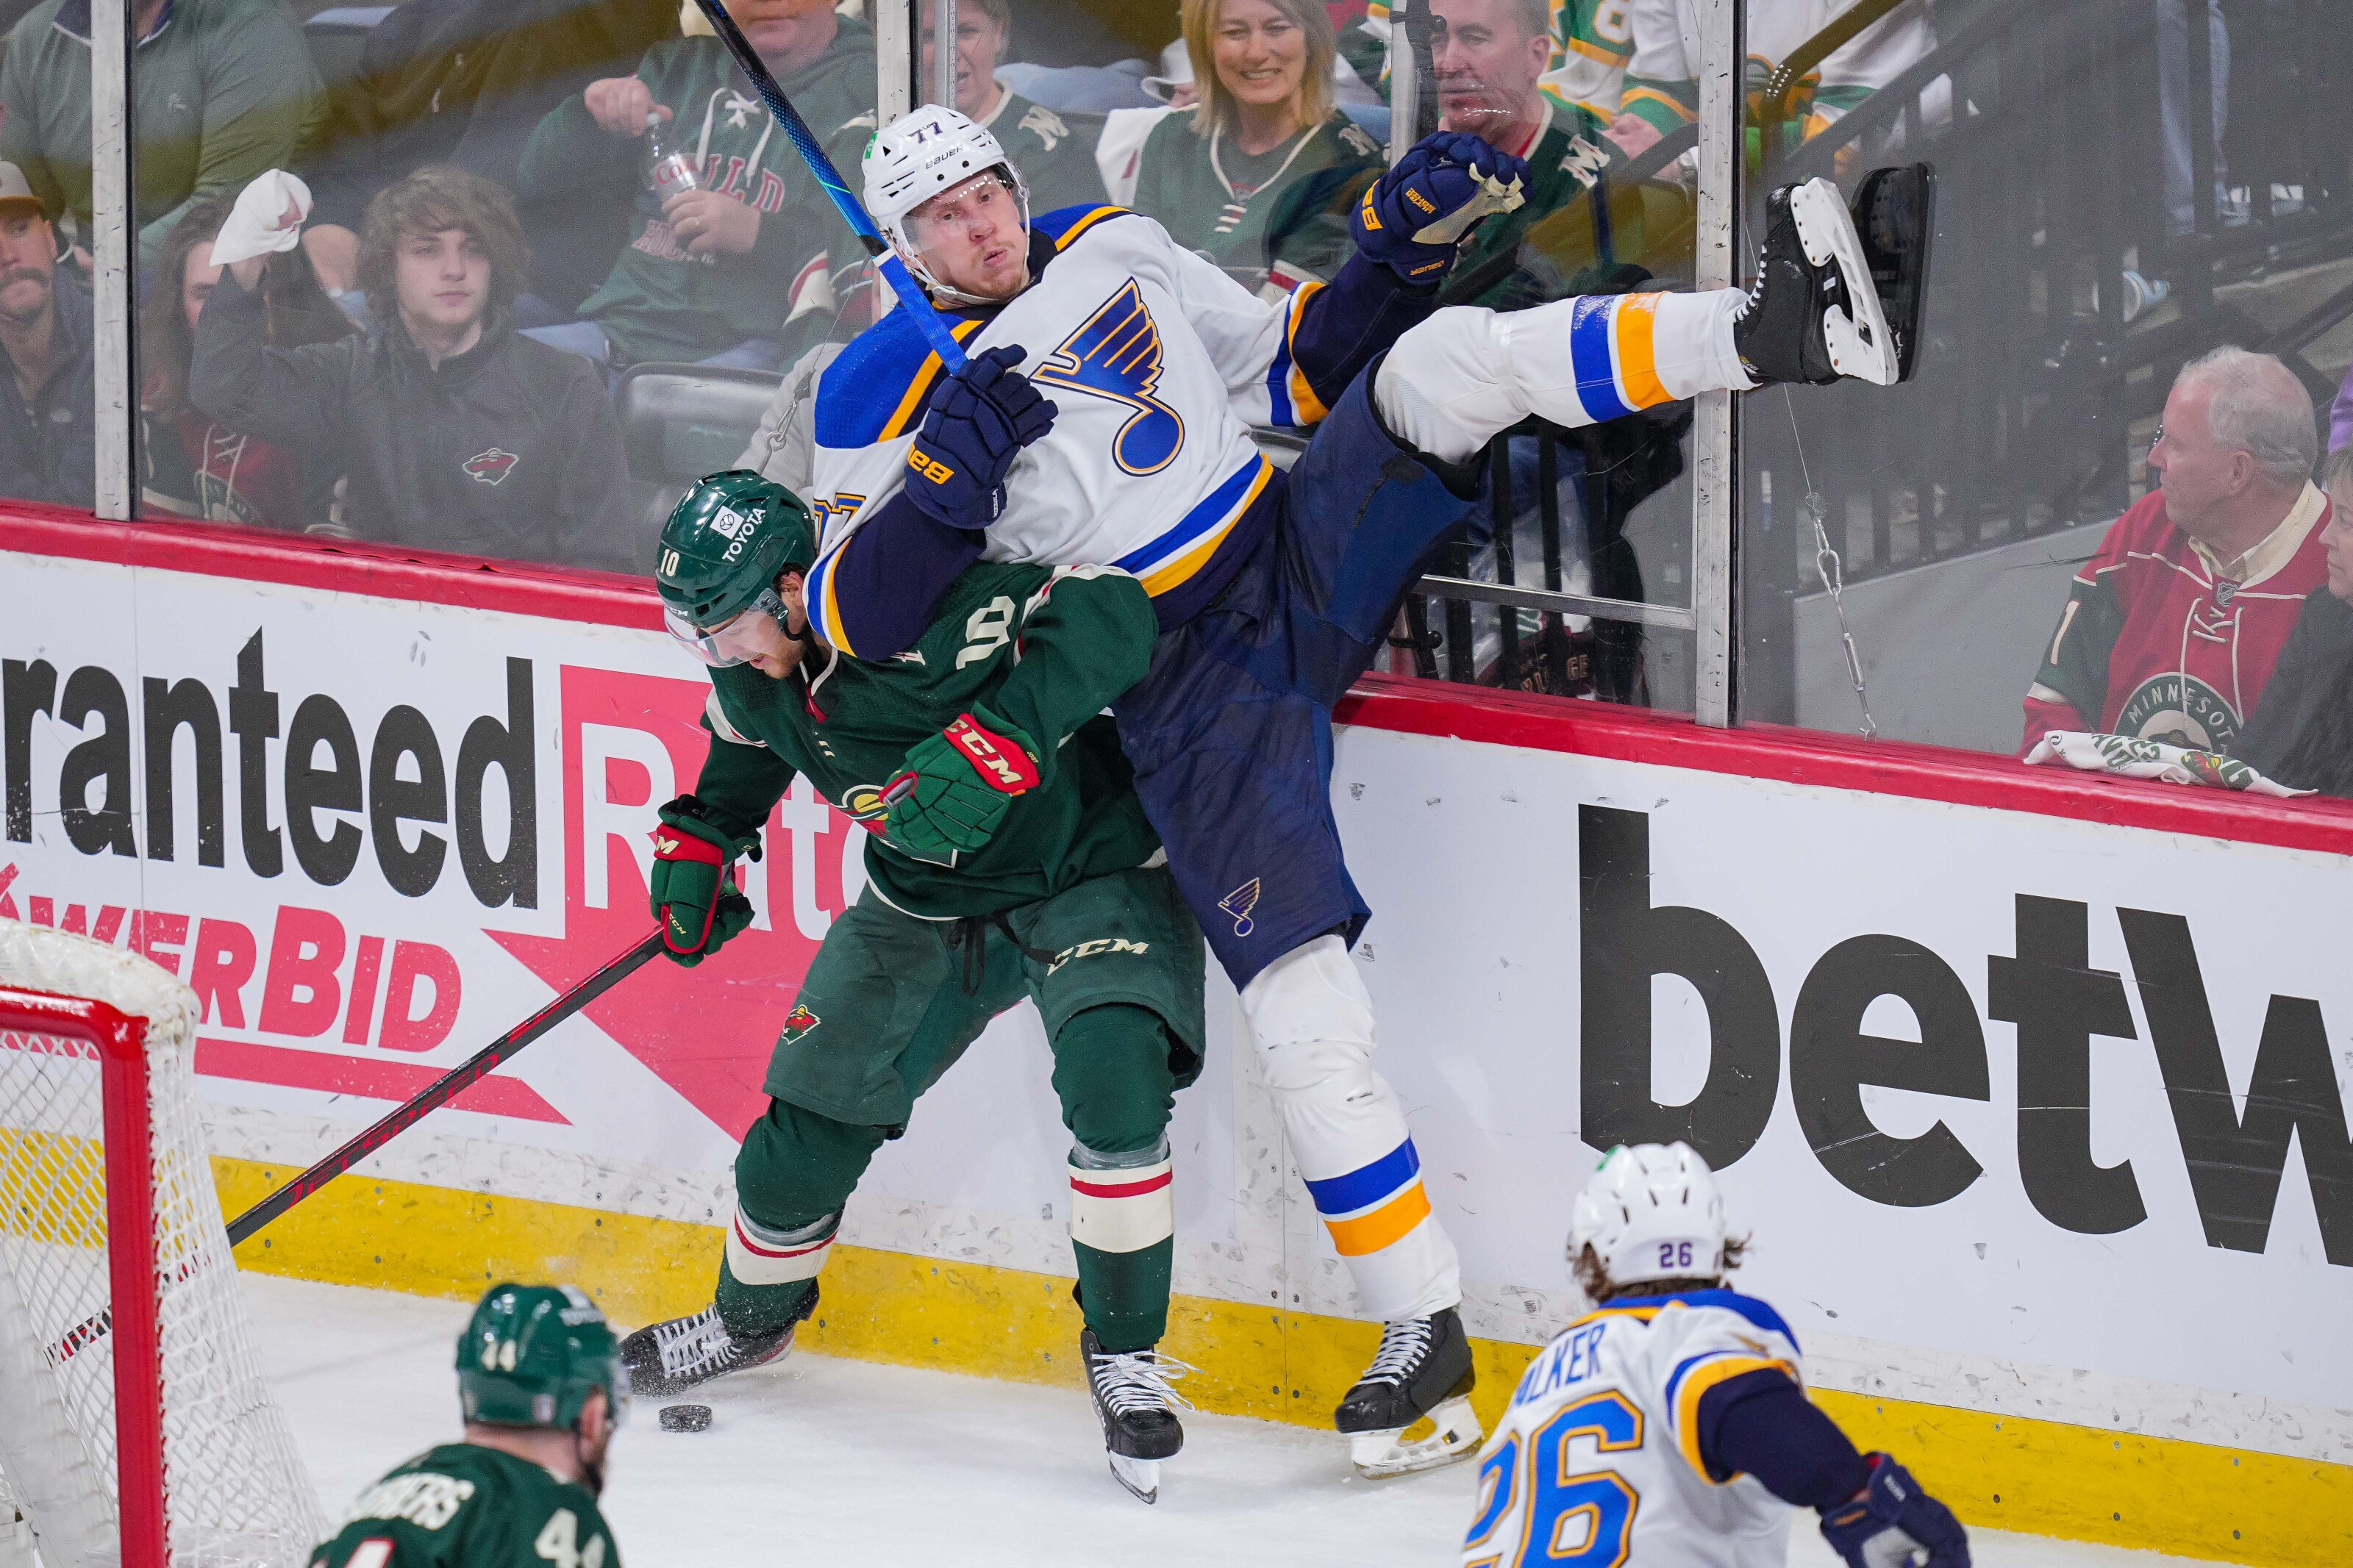 St. Louis Blues at Minnesota Wild Game 2 odds, picks and predictions